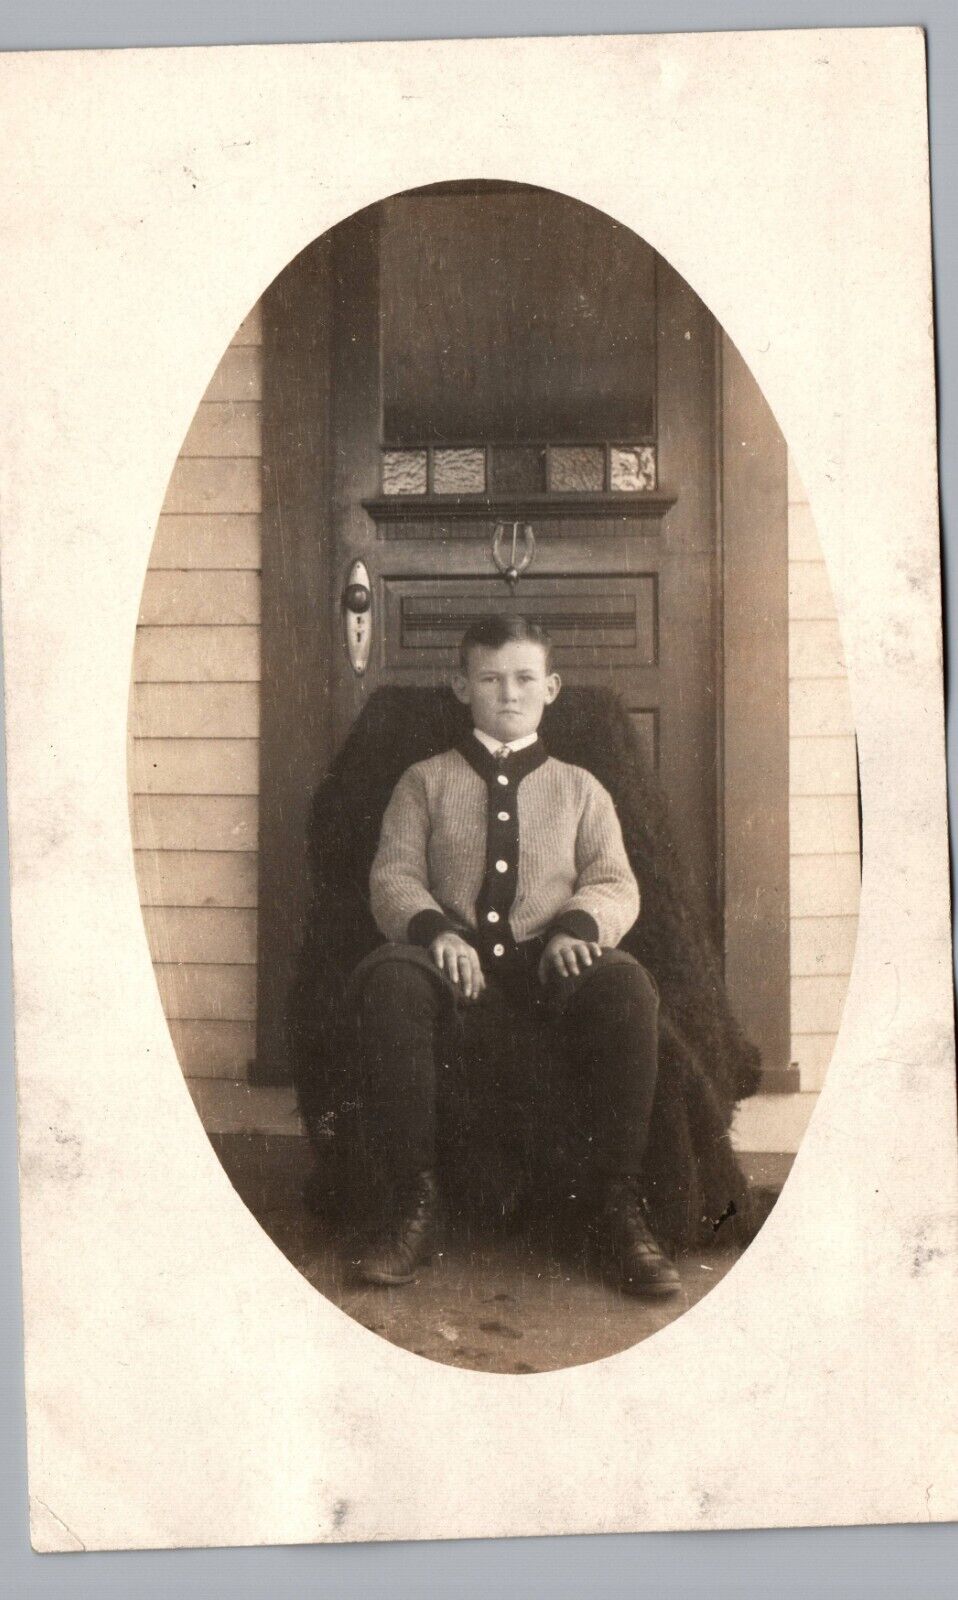 YOUNG BOY IN SWEATER NICE PORTRAIT c1910 real photo postcard rppc